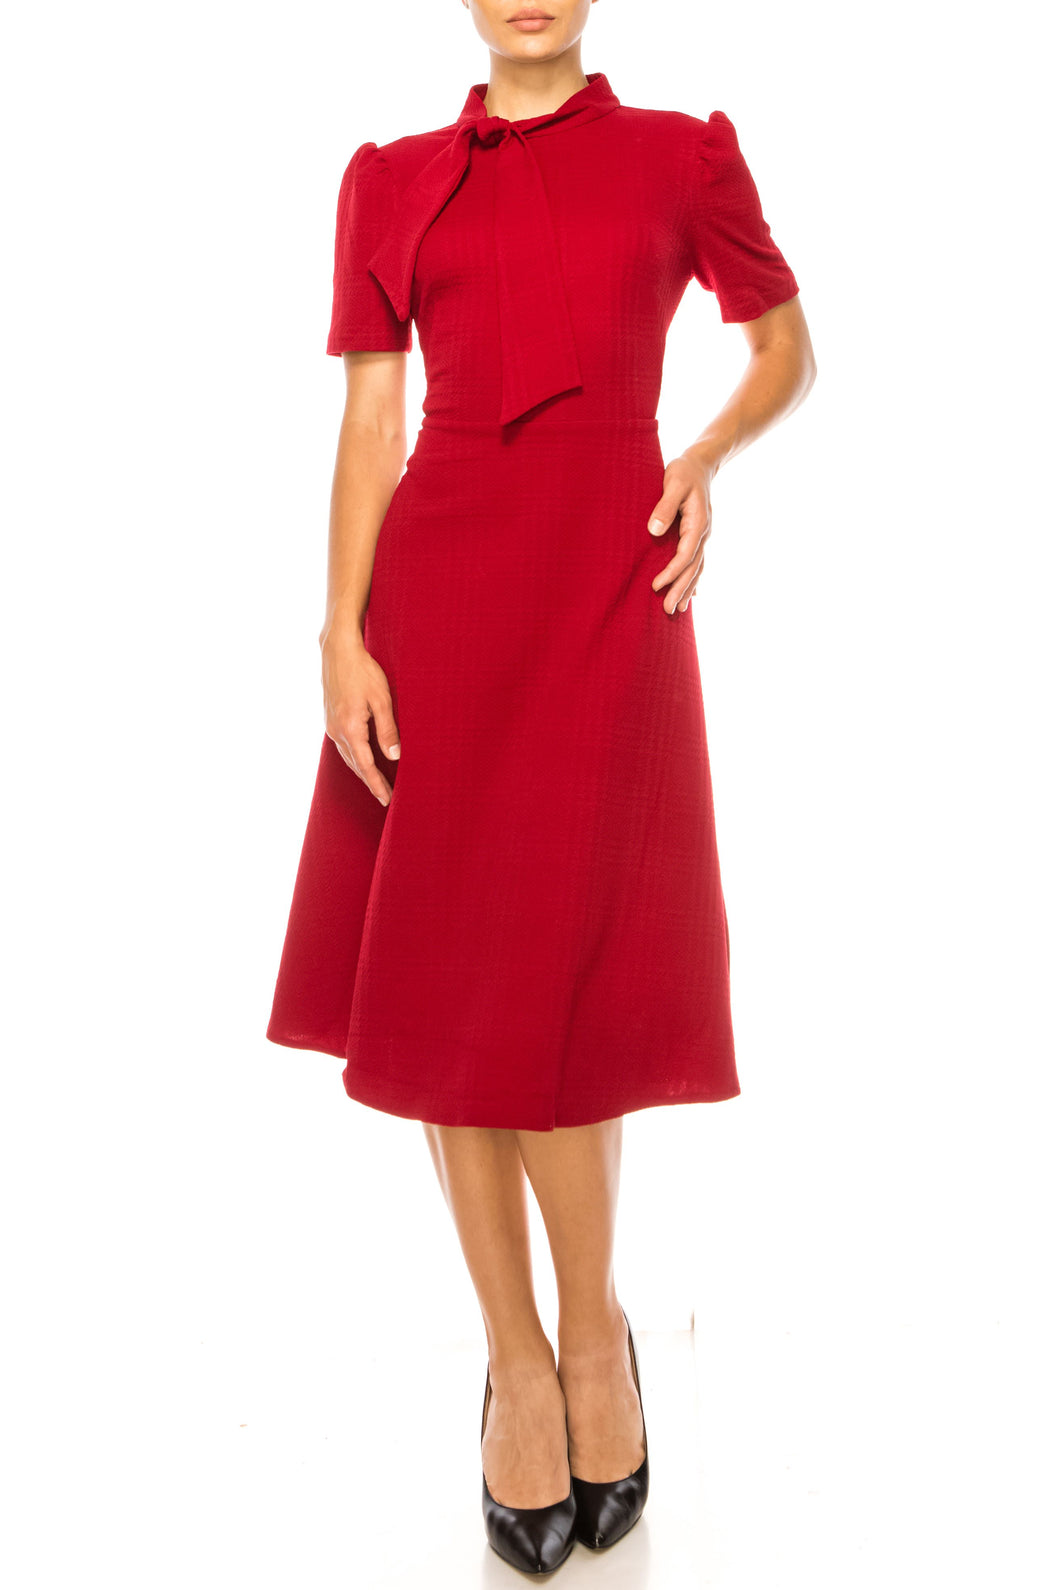 Maggy London Classic A-Line Day Dress Navy or Red Sizes 6/8/14 Remaining!